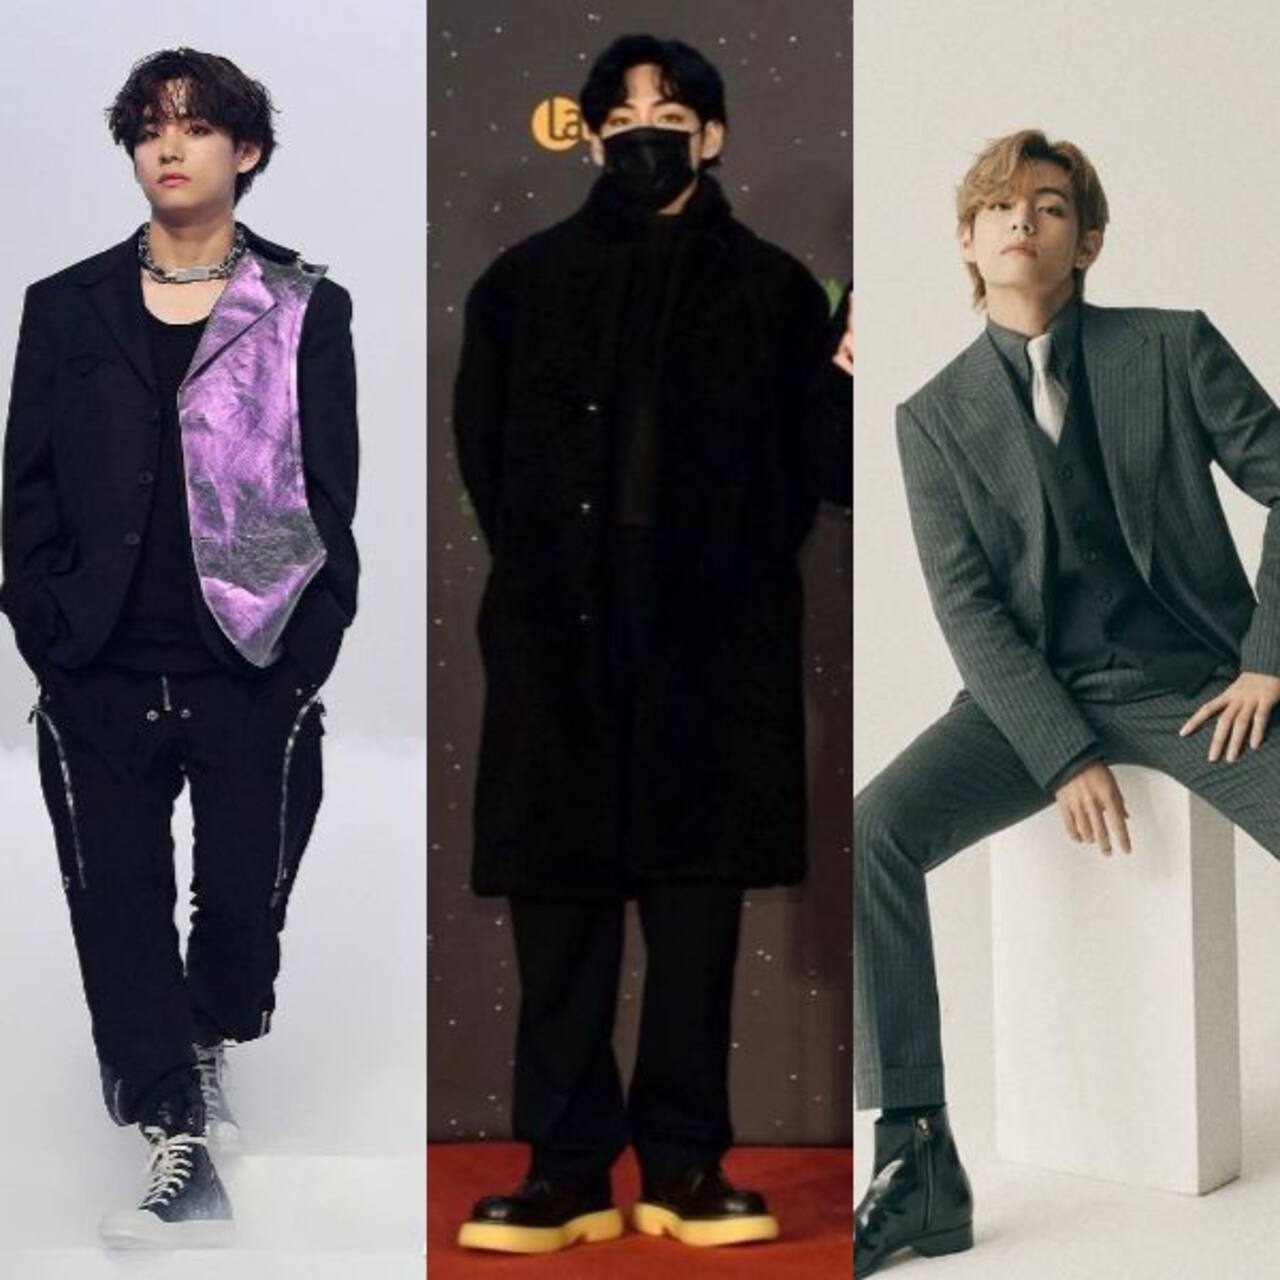 7 new Asian luxury brand ambassadors to watch in 2023, from BTS' Jimin for  Dior and Suga with Valentino, to NewJeans' Danielle's deal with Burberry,  Dylan Wang's Louis Vuitton gig and Win's